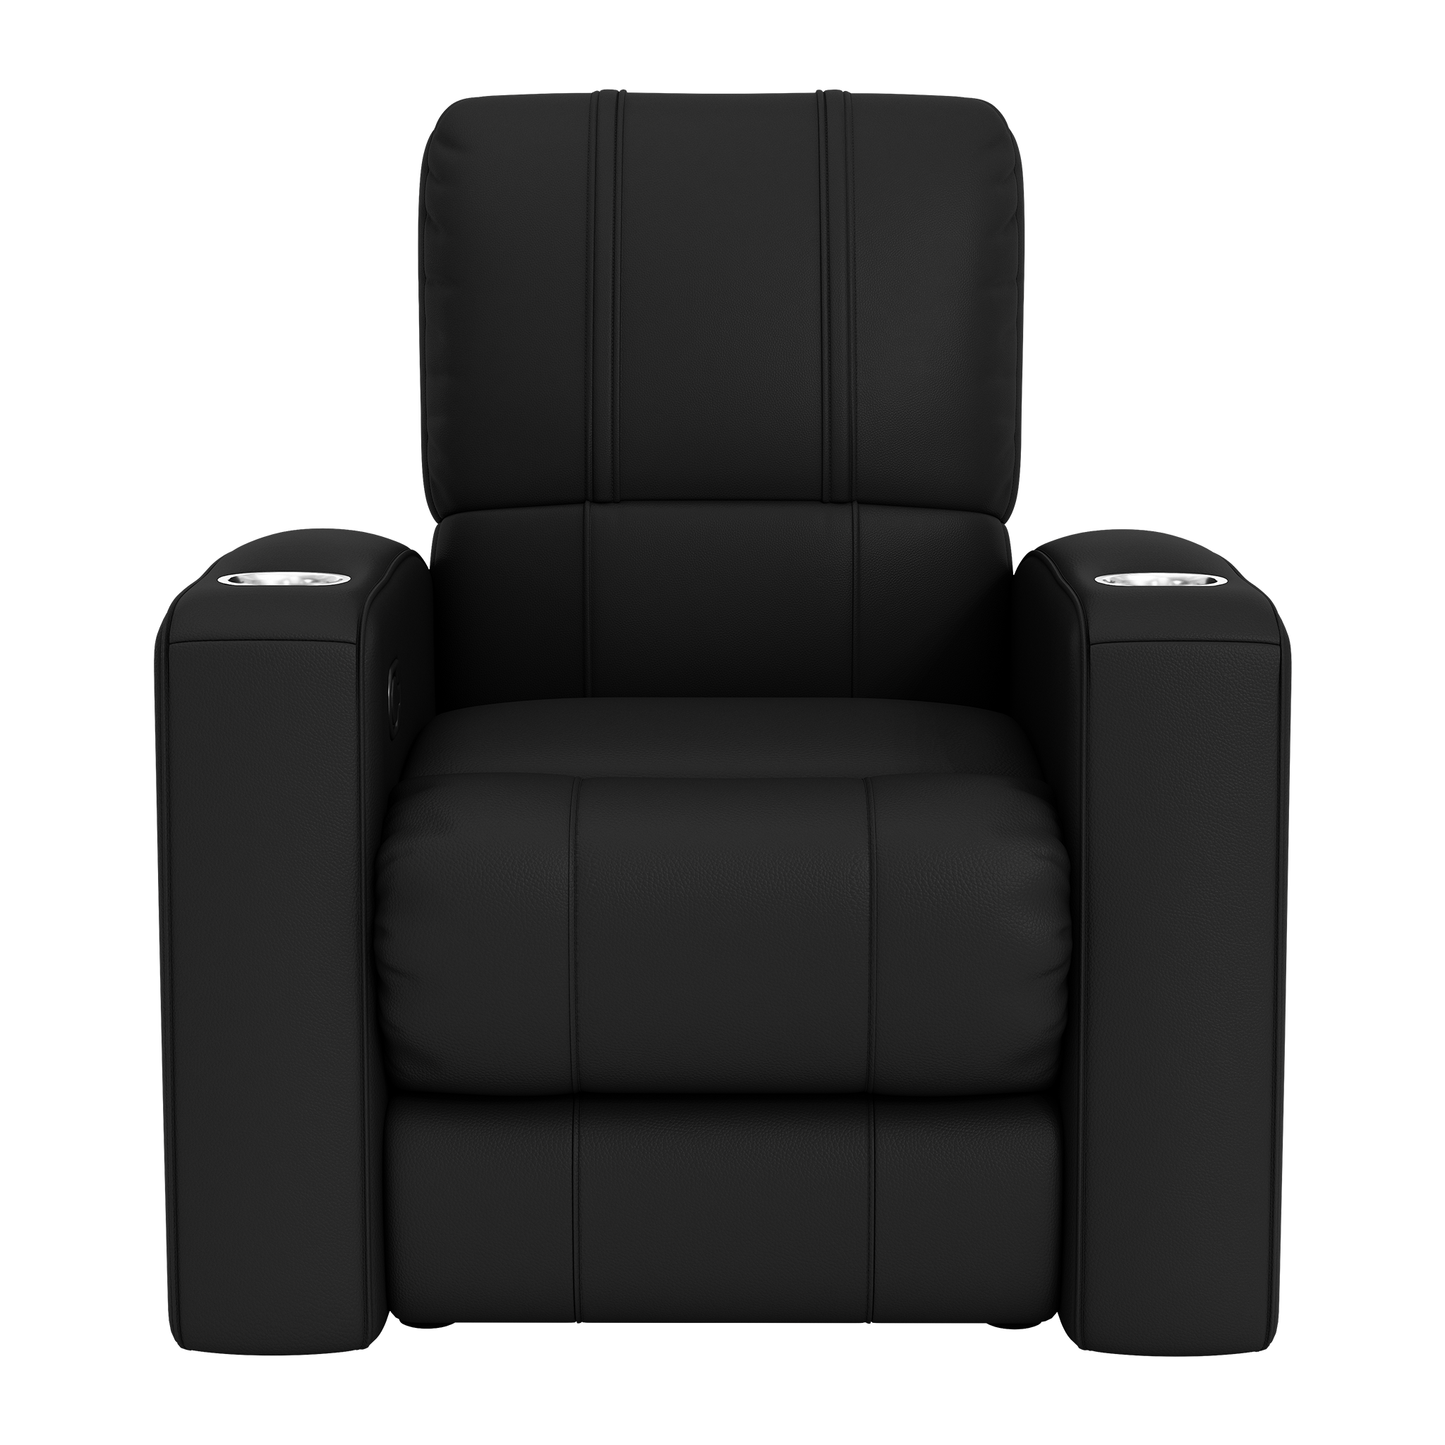 Relax Home Theater Recliner with Arizona Coyotes Secondary Logo